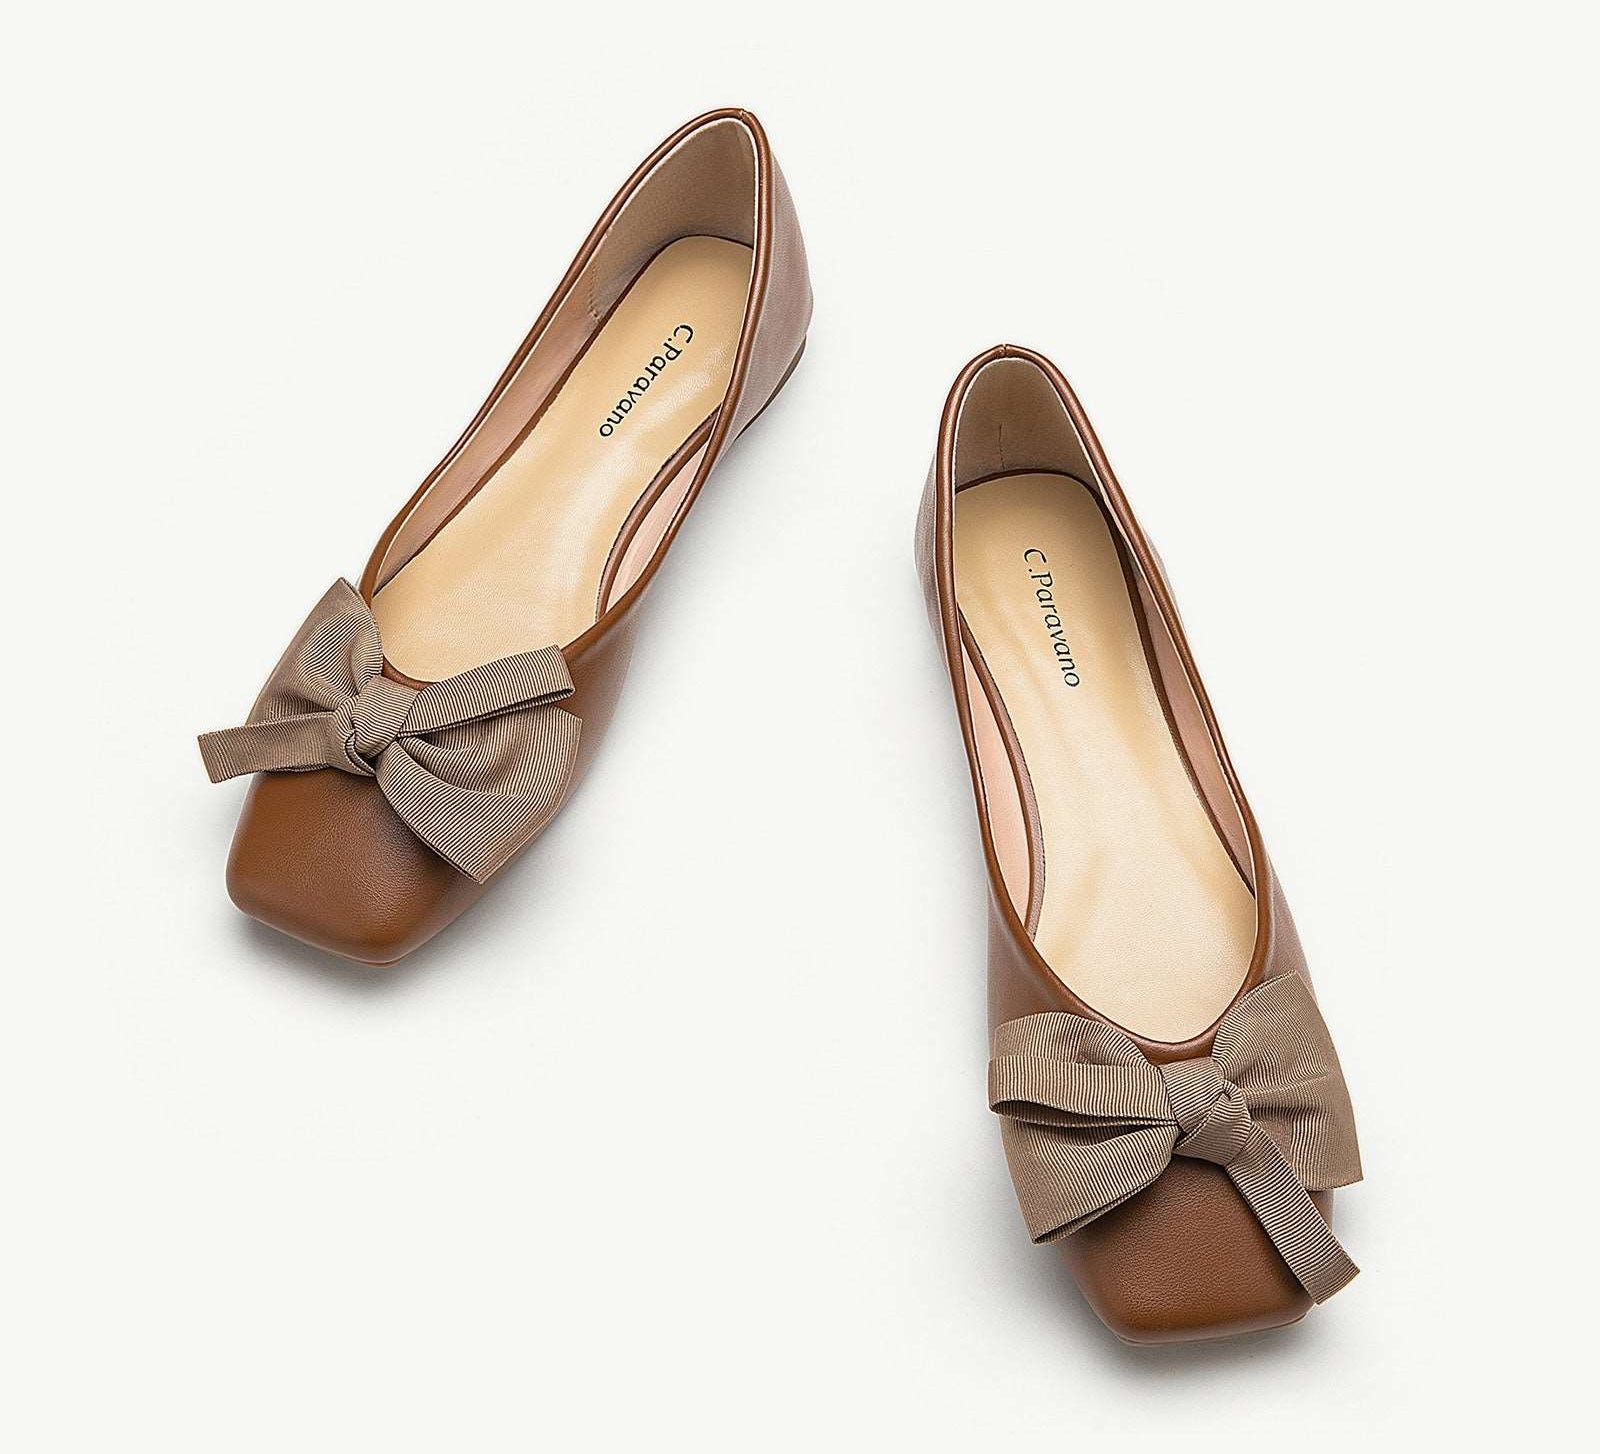 Bowknot Square Flats Soft Leather